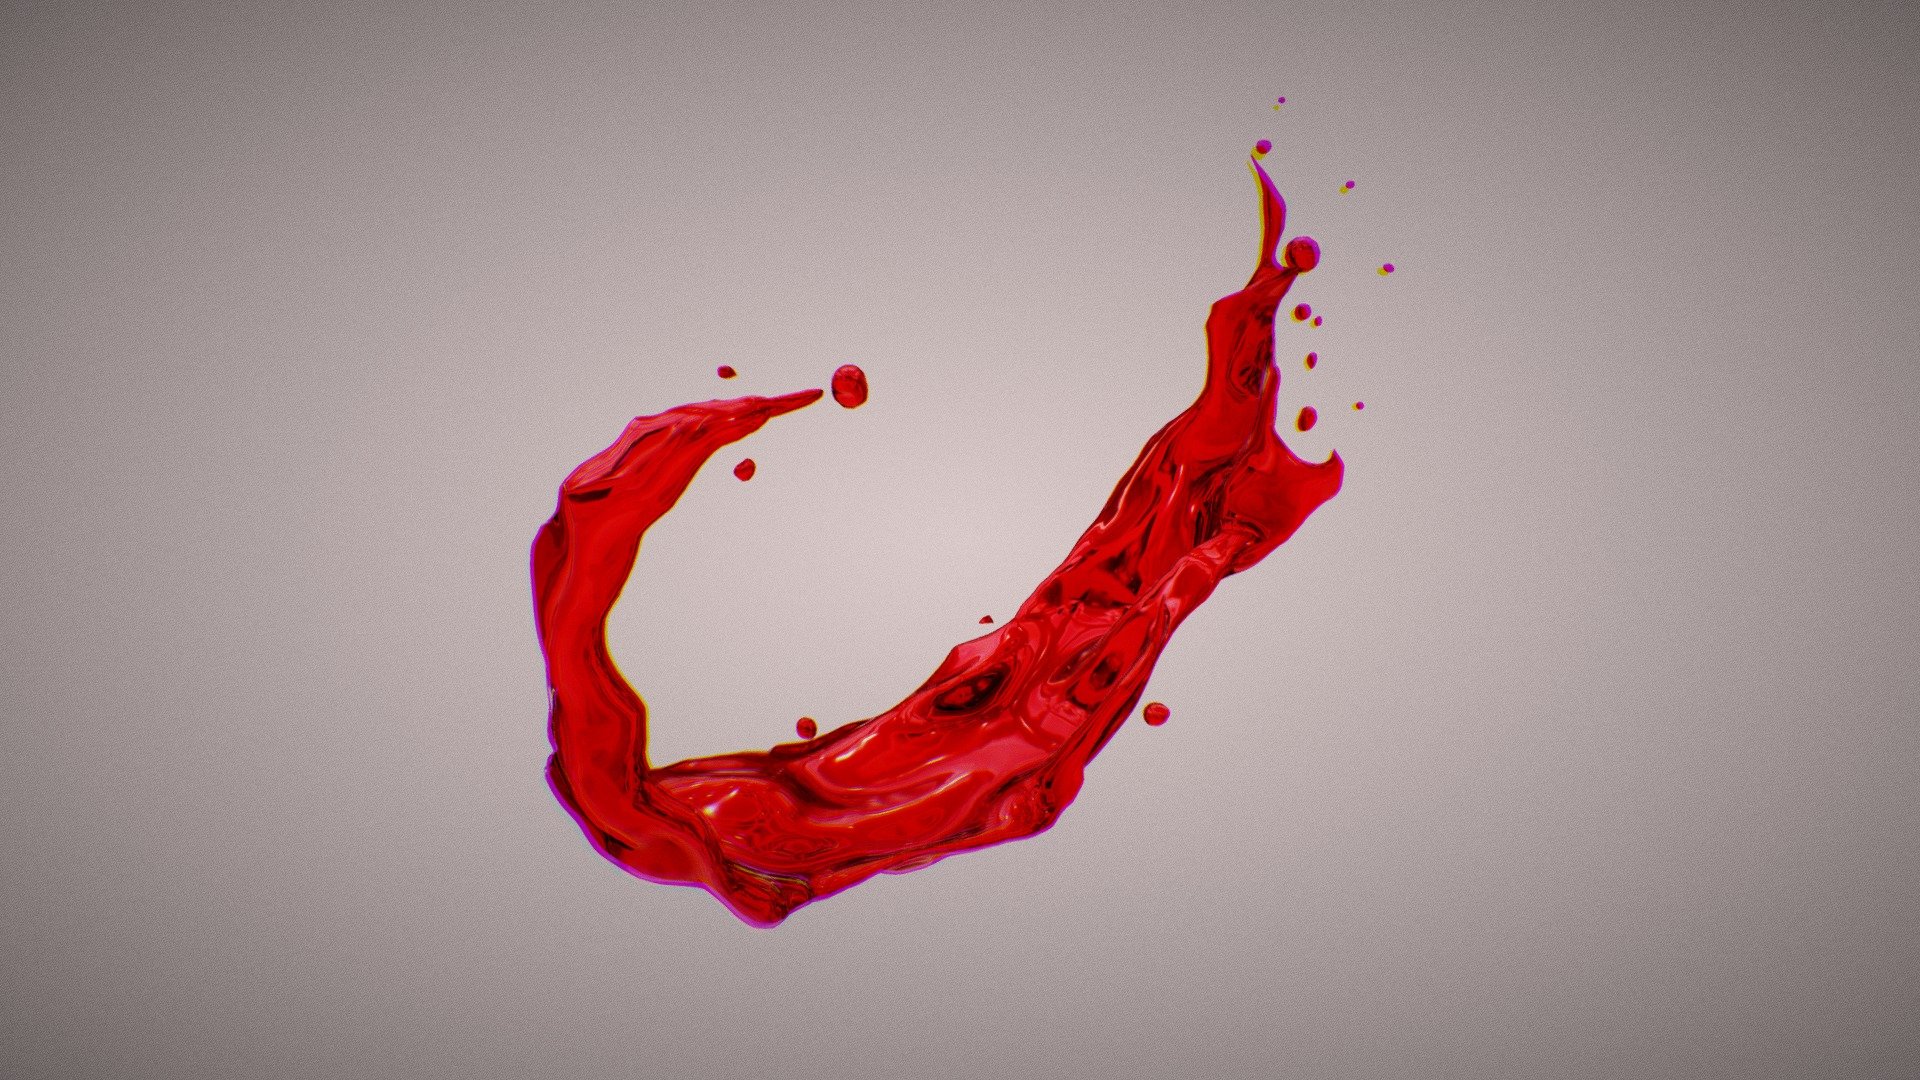 3D model of a Splash,

It was Simulated in blender.

it can be a Water splash, Wine splash or and other liquid depending on the material you apply on it 3d model